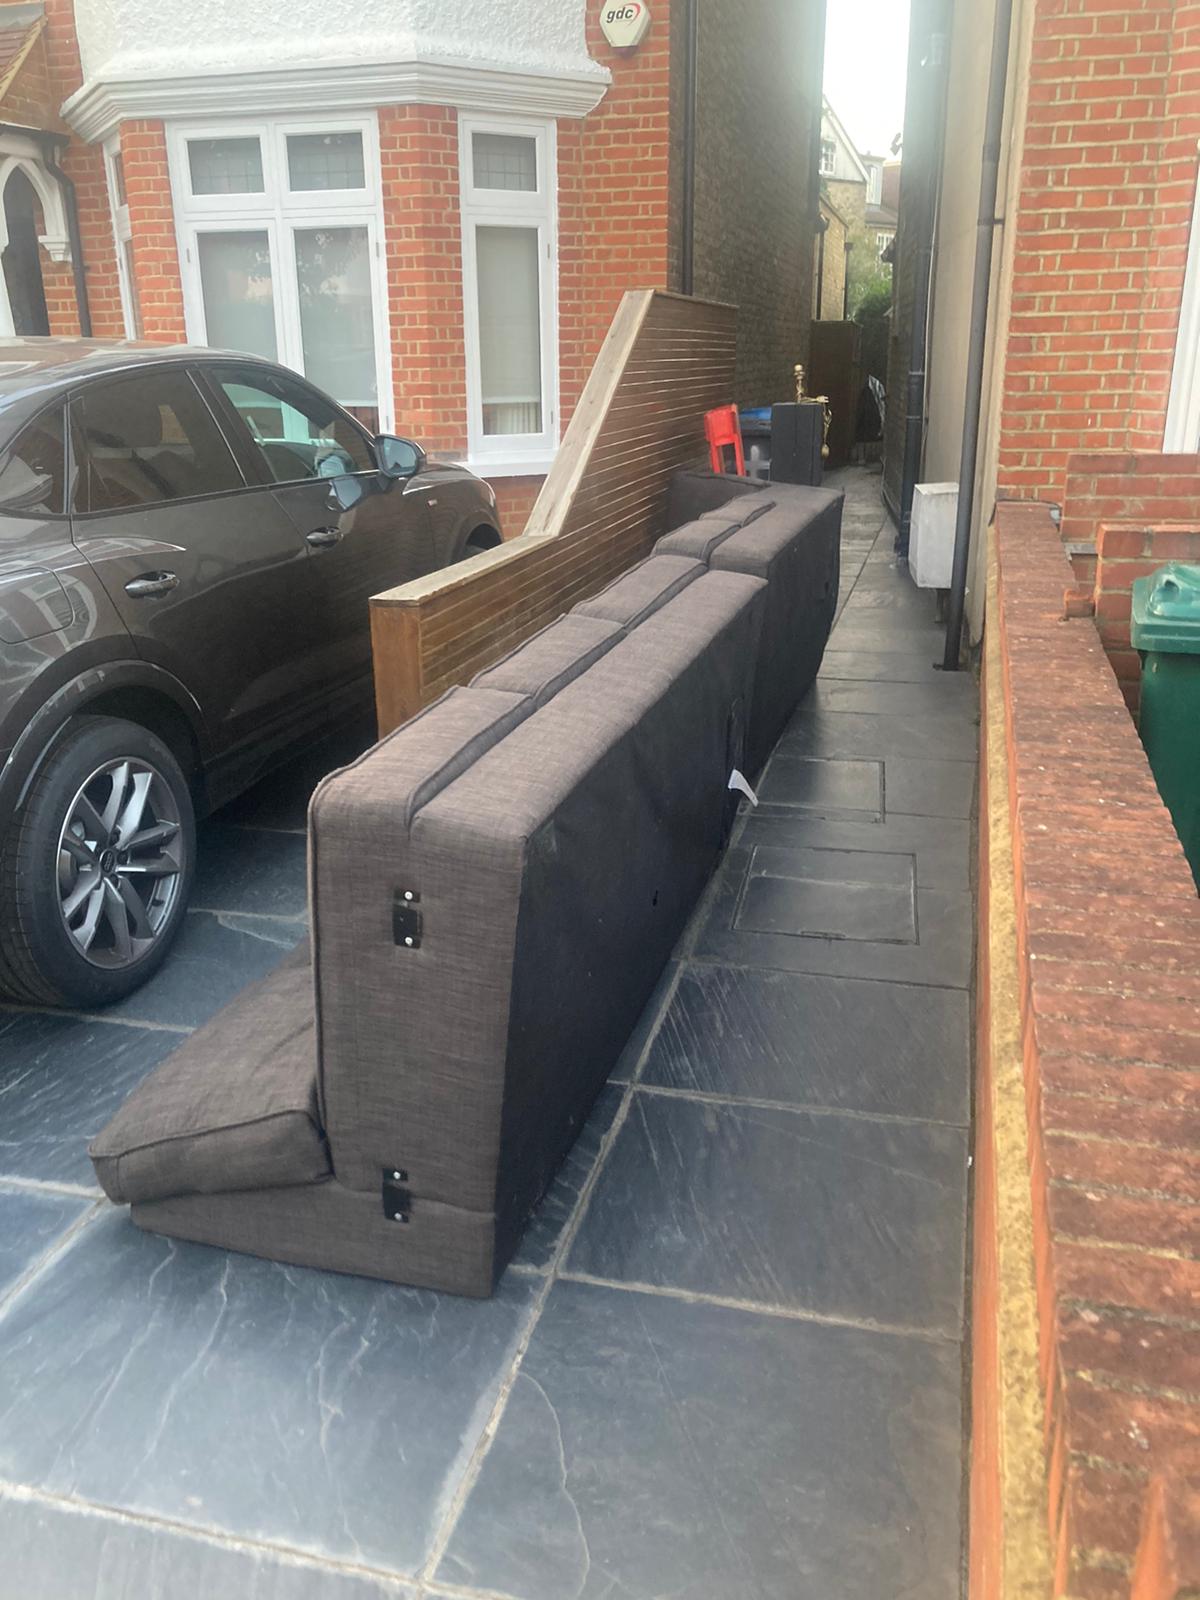 Corner Sofa, 3 Seater, Couch and Sofa Bed Removal Services in London and Surrey by EnviRecycle Ltd